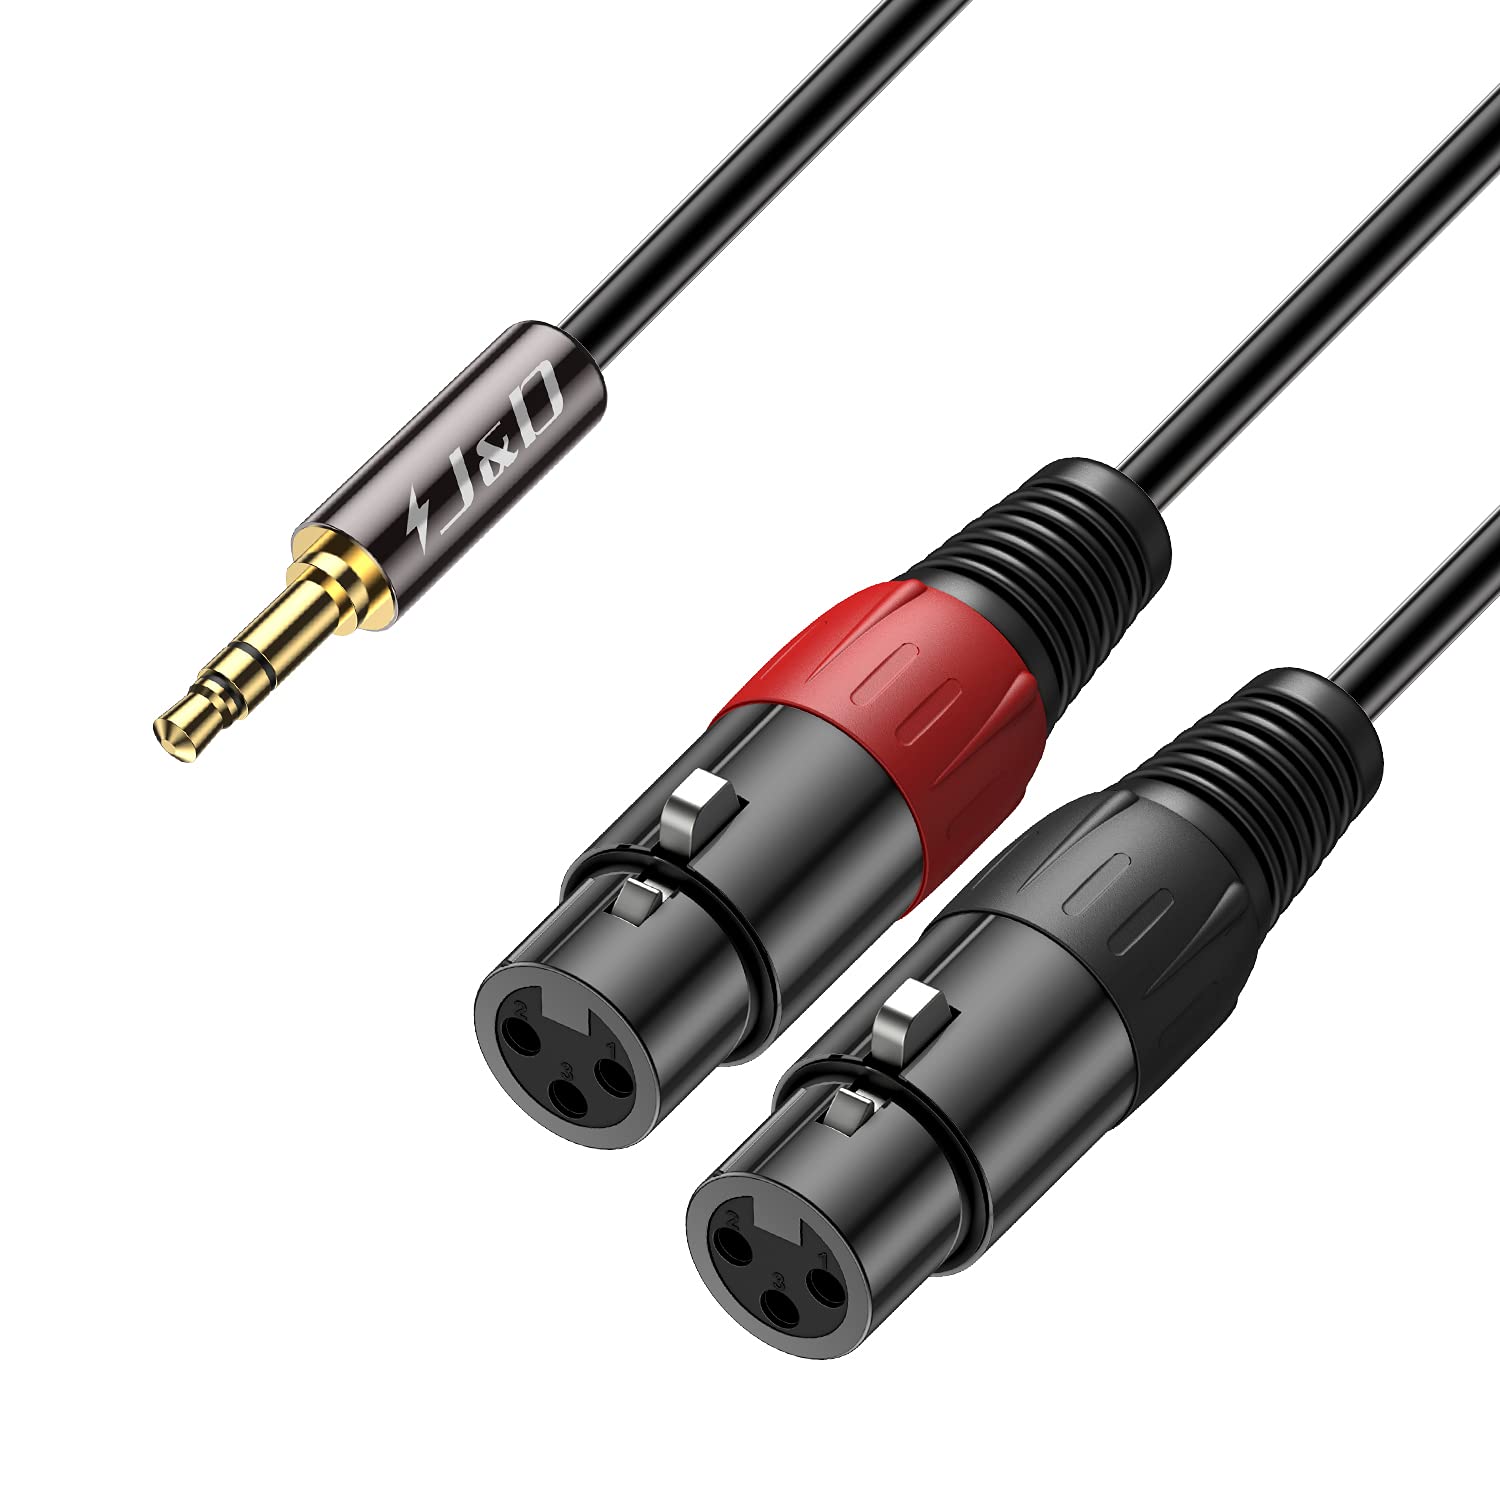 J&D XLR to 3.5mm TRS Stereo Cable, Microphone Splitter 2 XLR Female to 3.5mm TRS male Unbalanced Interconnect Stereo Audio Patch Cable Adapter for